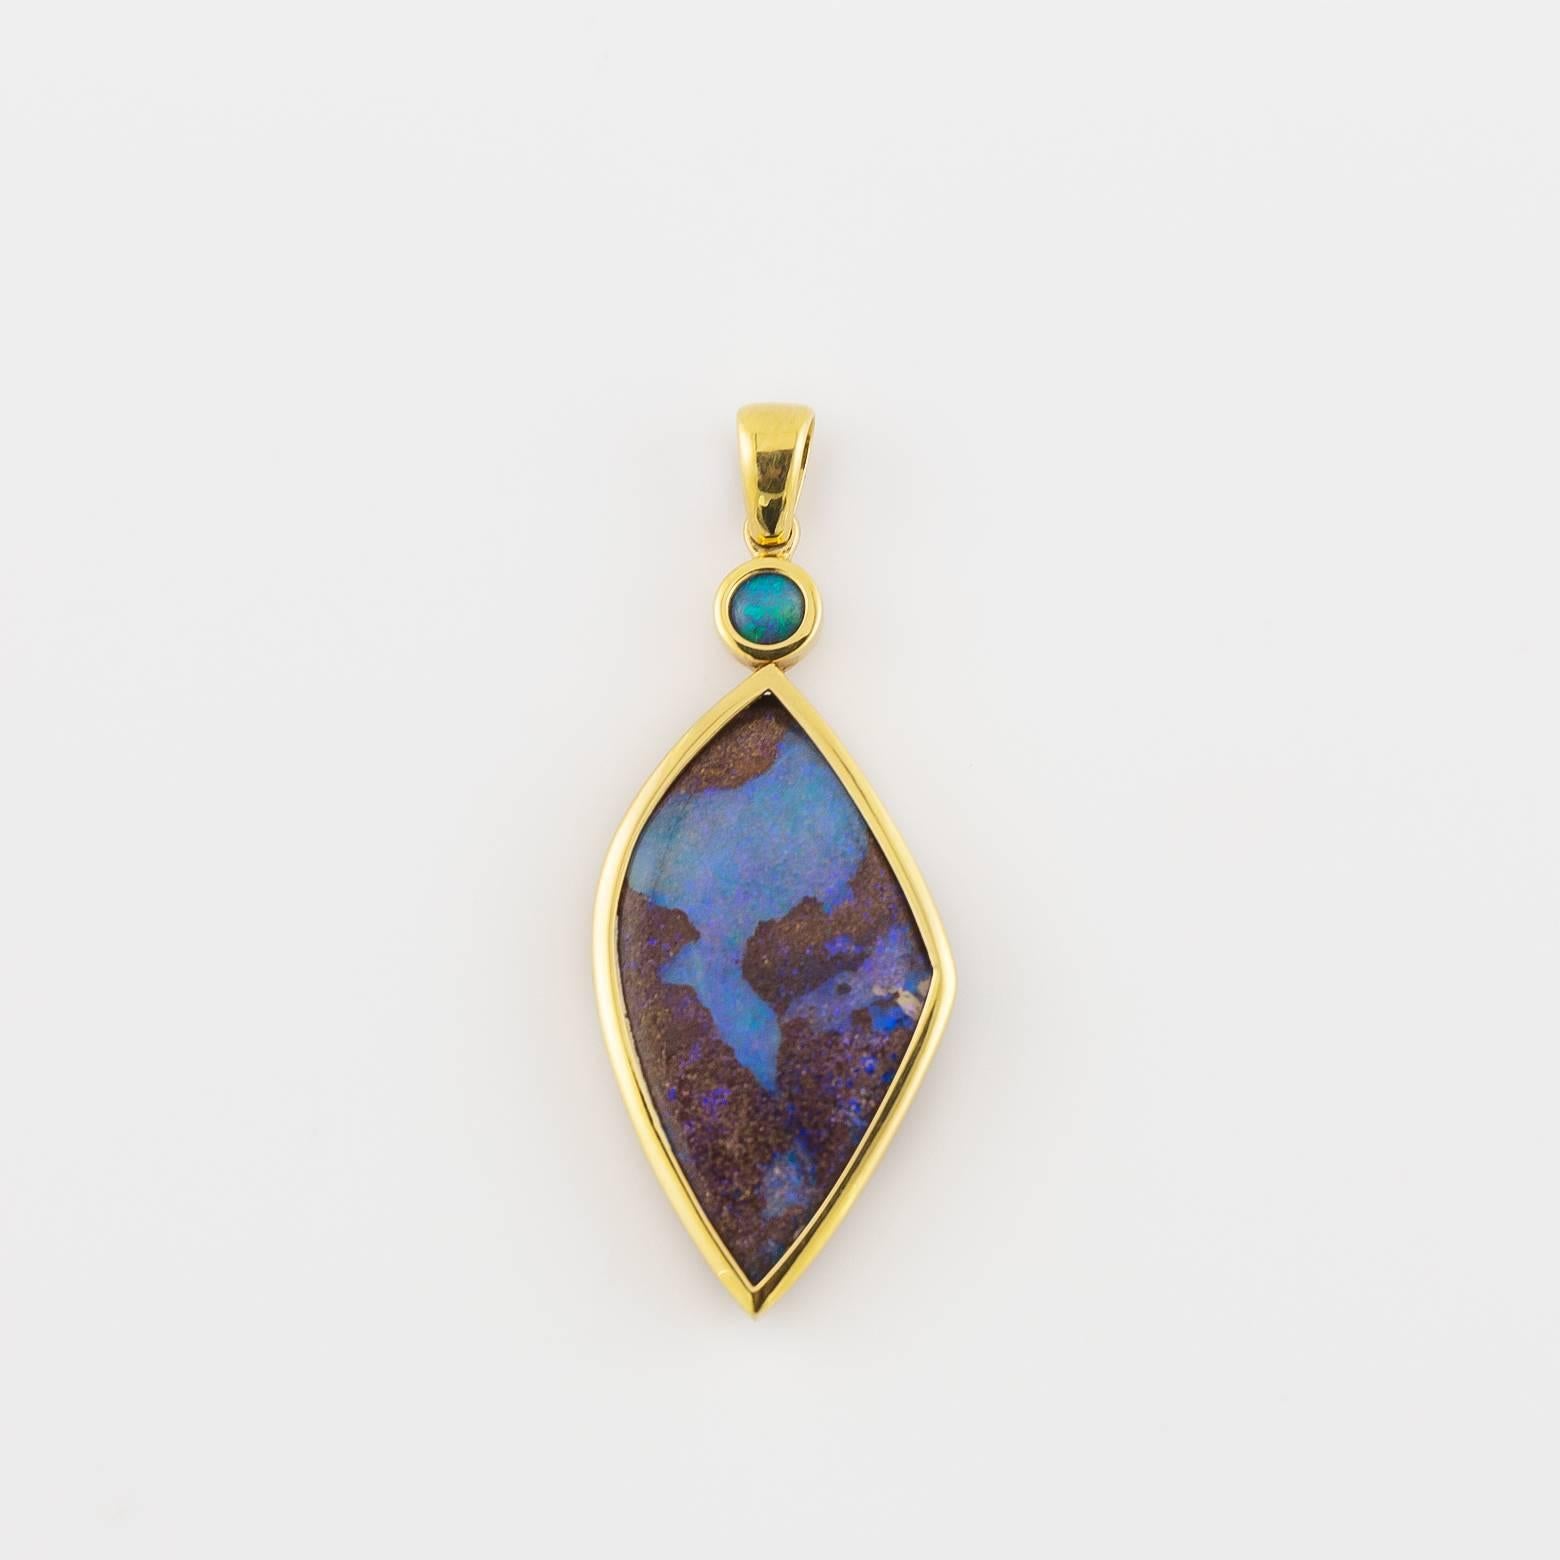 This stunning pendant is electrifying with sparkling blues and greens that seem  out of this world. This beautiful butterfly wing-like Boulder Opal dazzles, sparkles, and enchants it's viewers. A stunning pendant set in 18K Yellow Gold. 